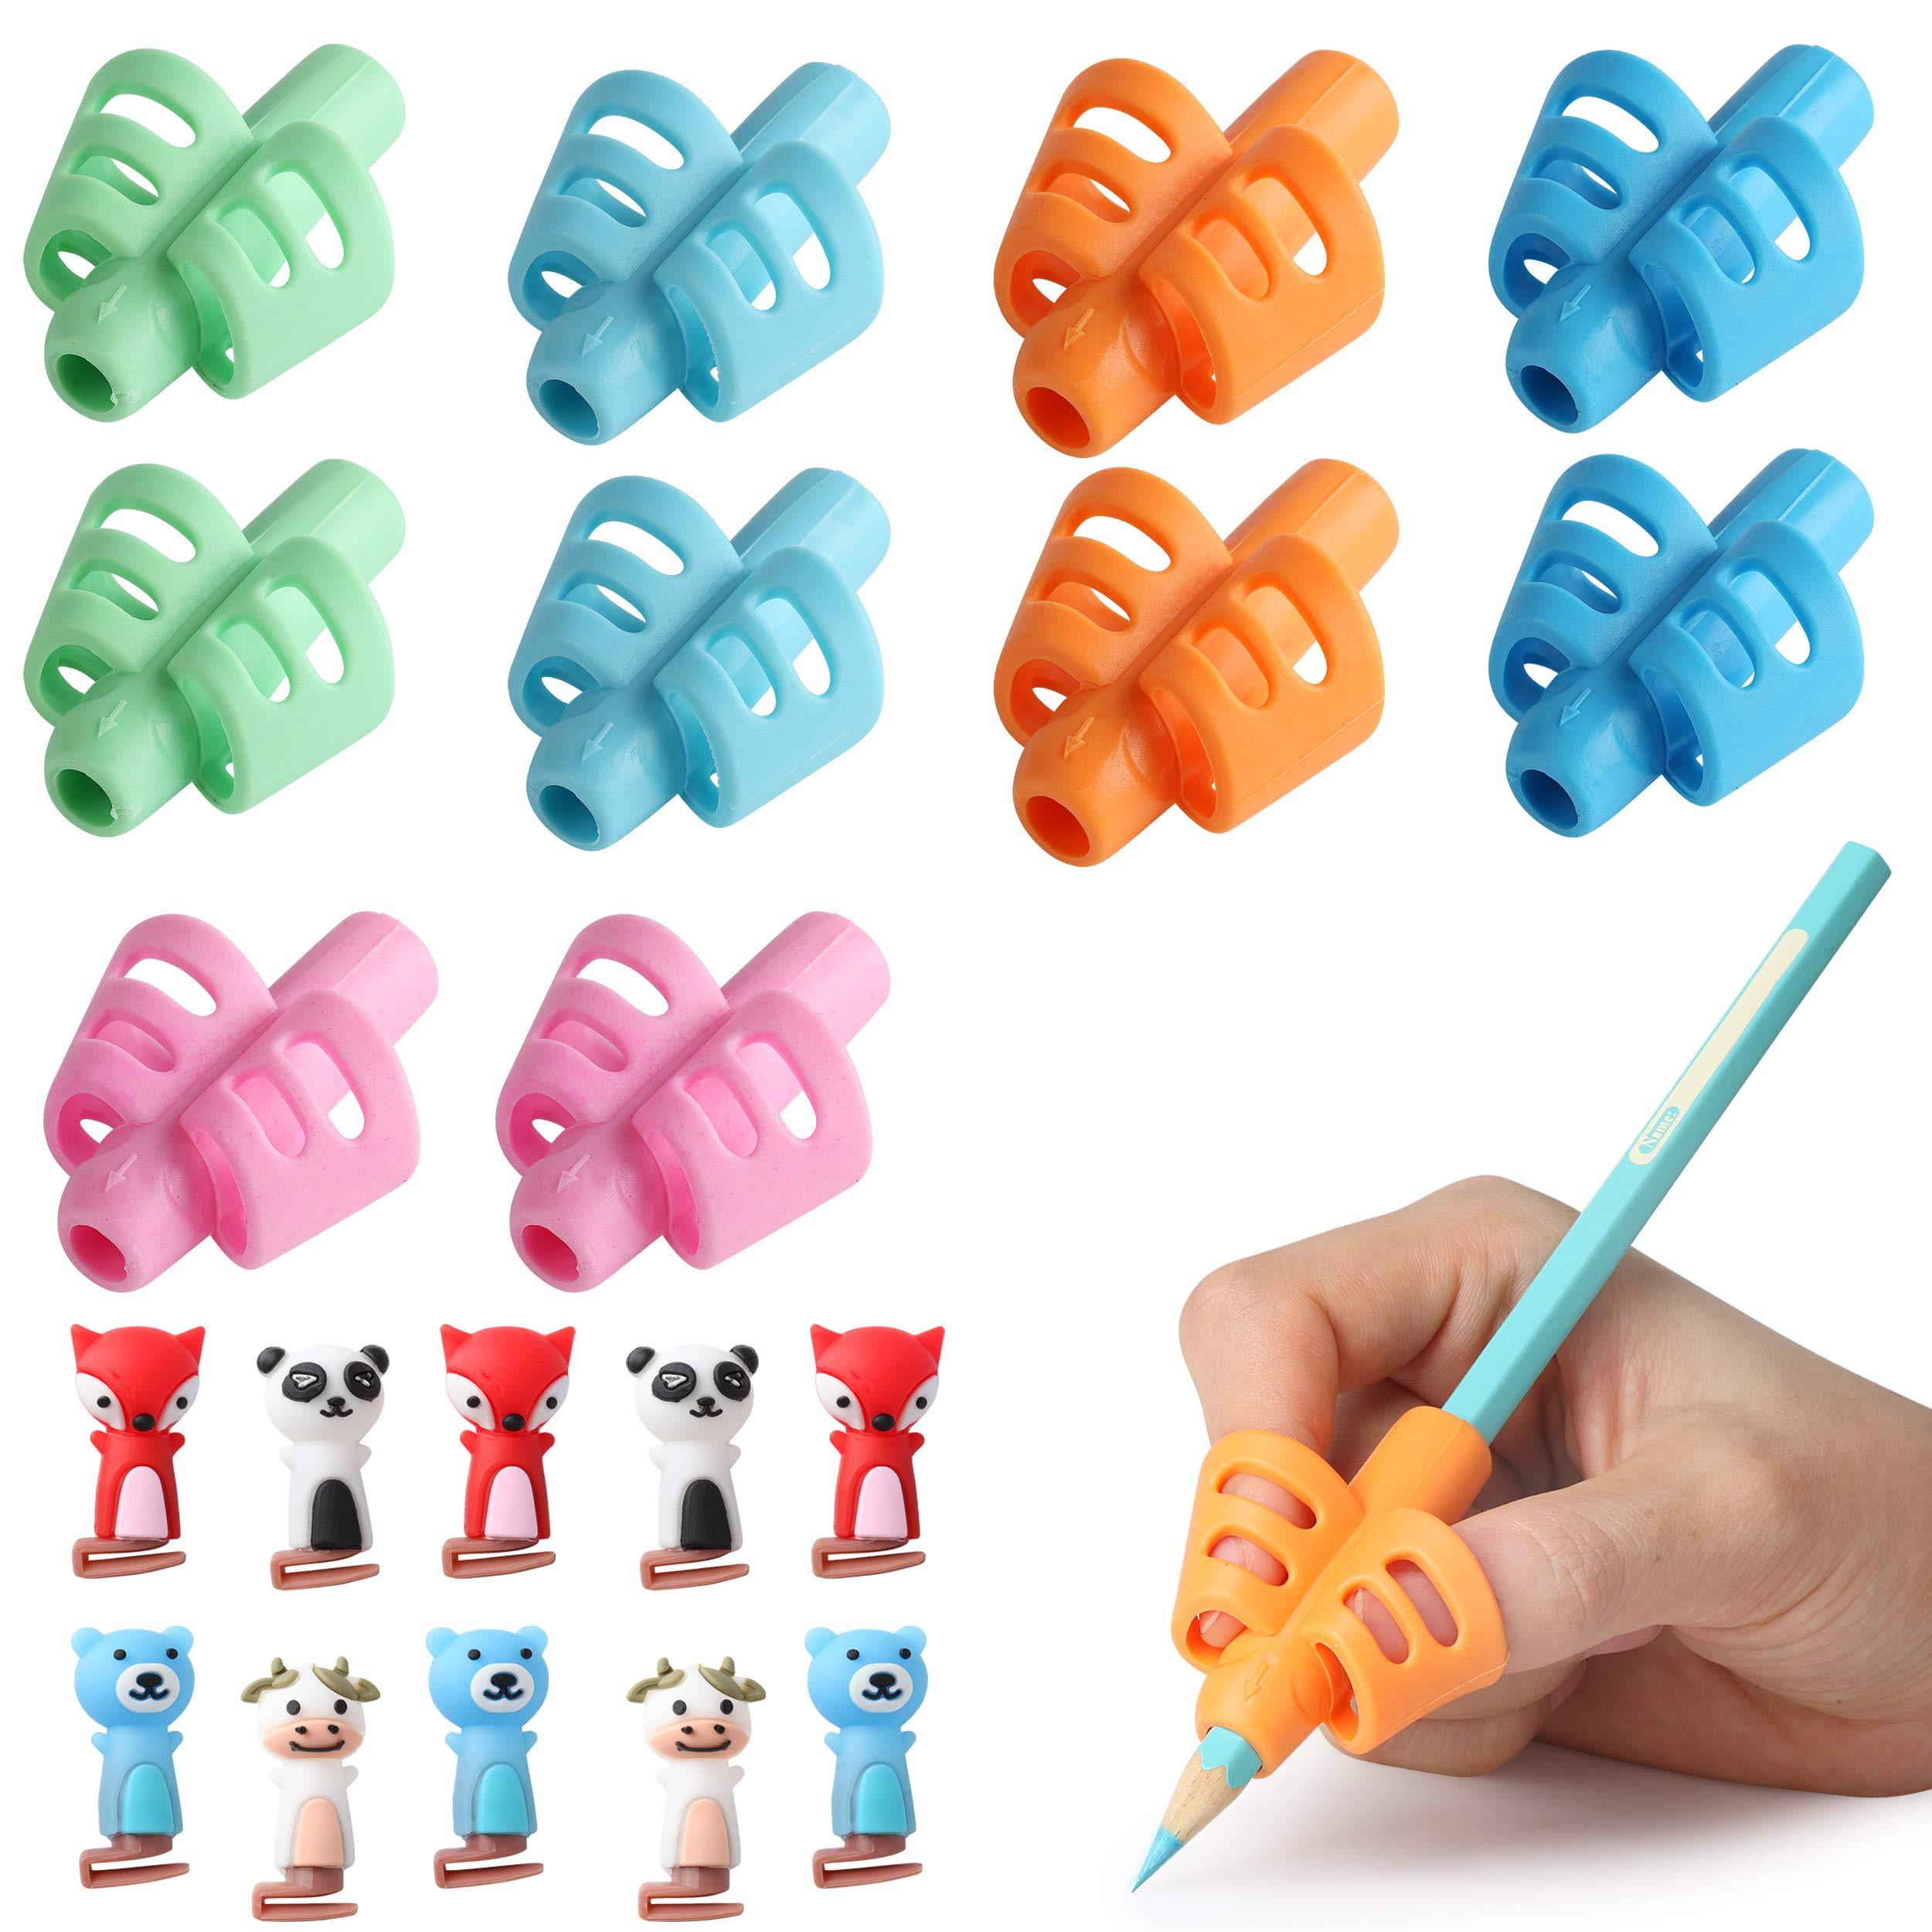 Silicone Pencil Grips Holder Ergonomic Pen Grippers Writing Aid For Kids 